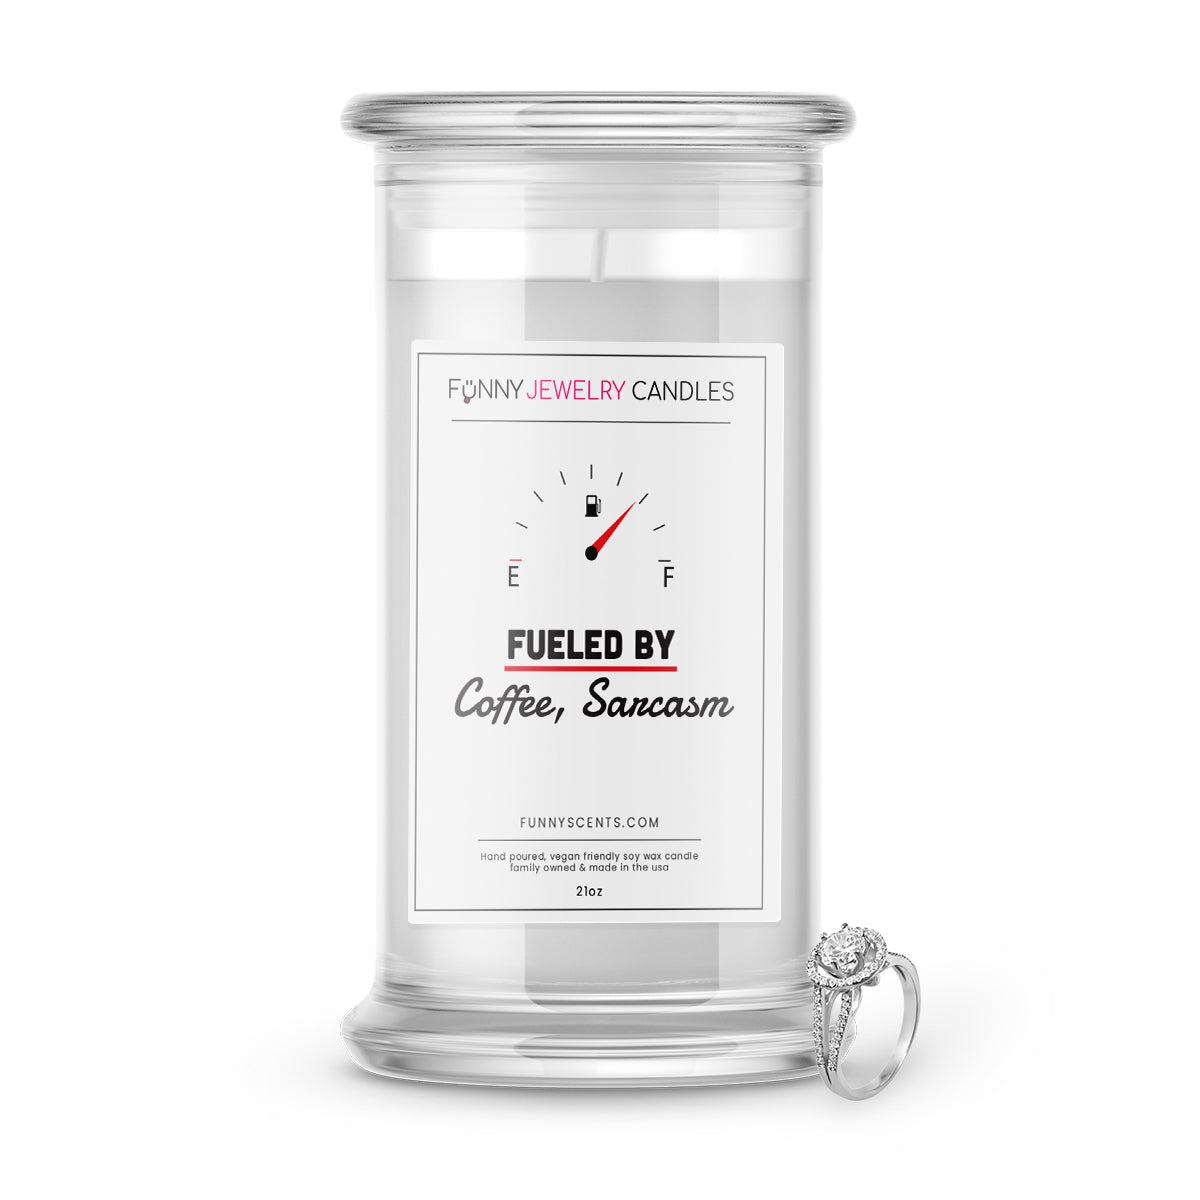 Fueled By Coffee Sarcasm and Jewelry Funny Candles